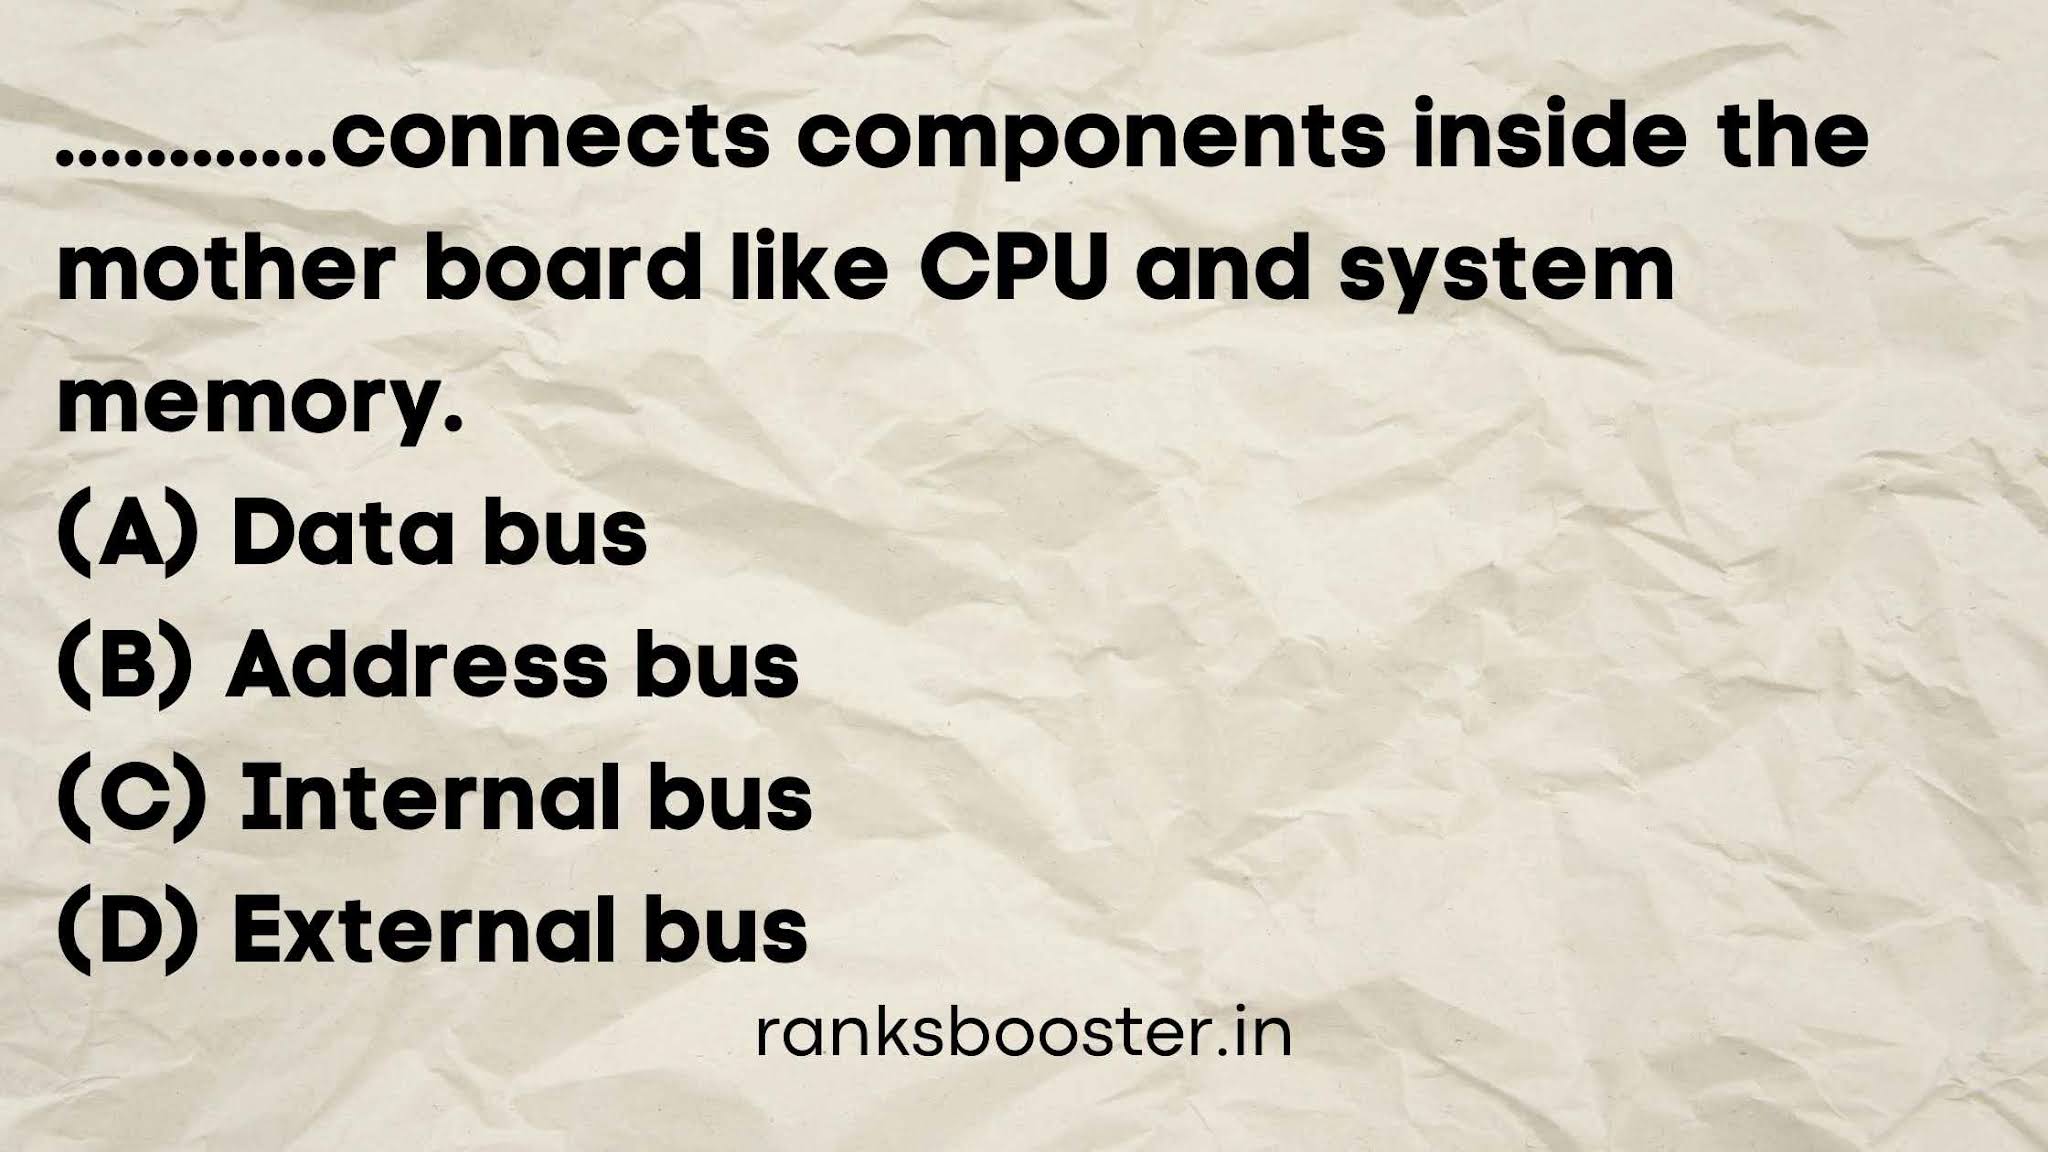 connects components inside the mother board like CPU and system memory. (A) Data bus (B) Address bus (C) Internal bus (D) External bus